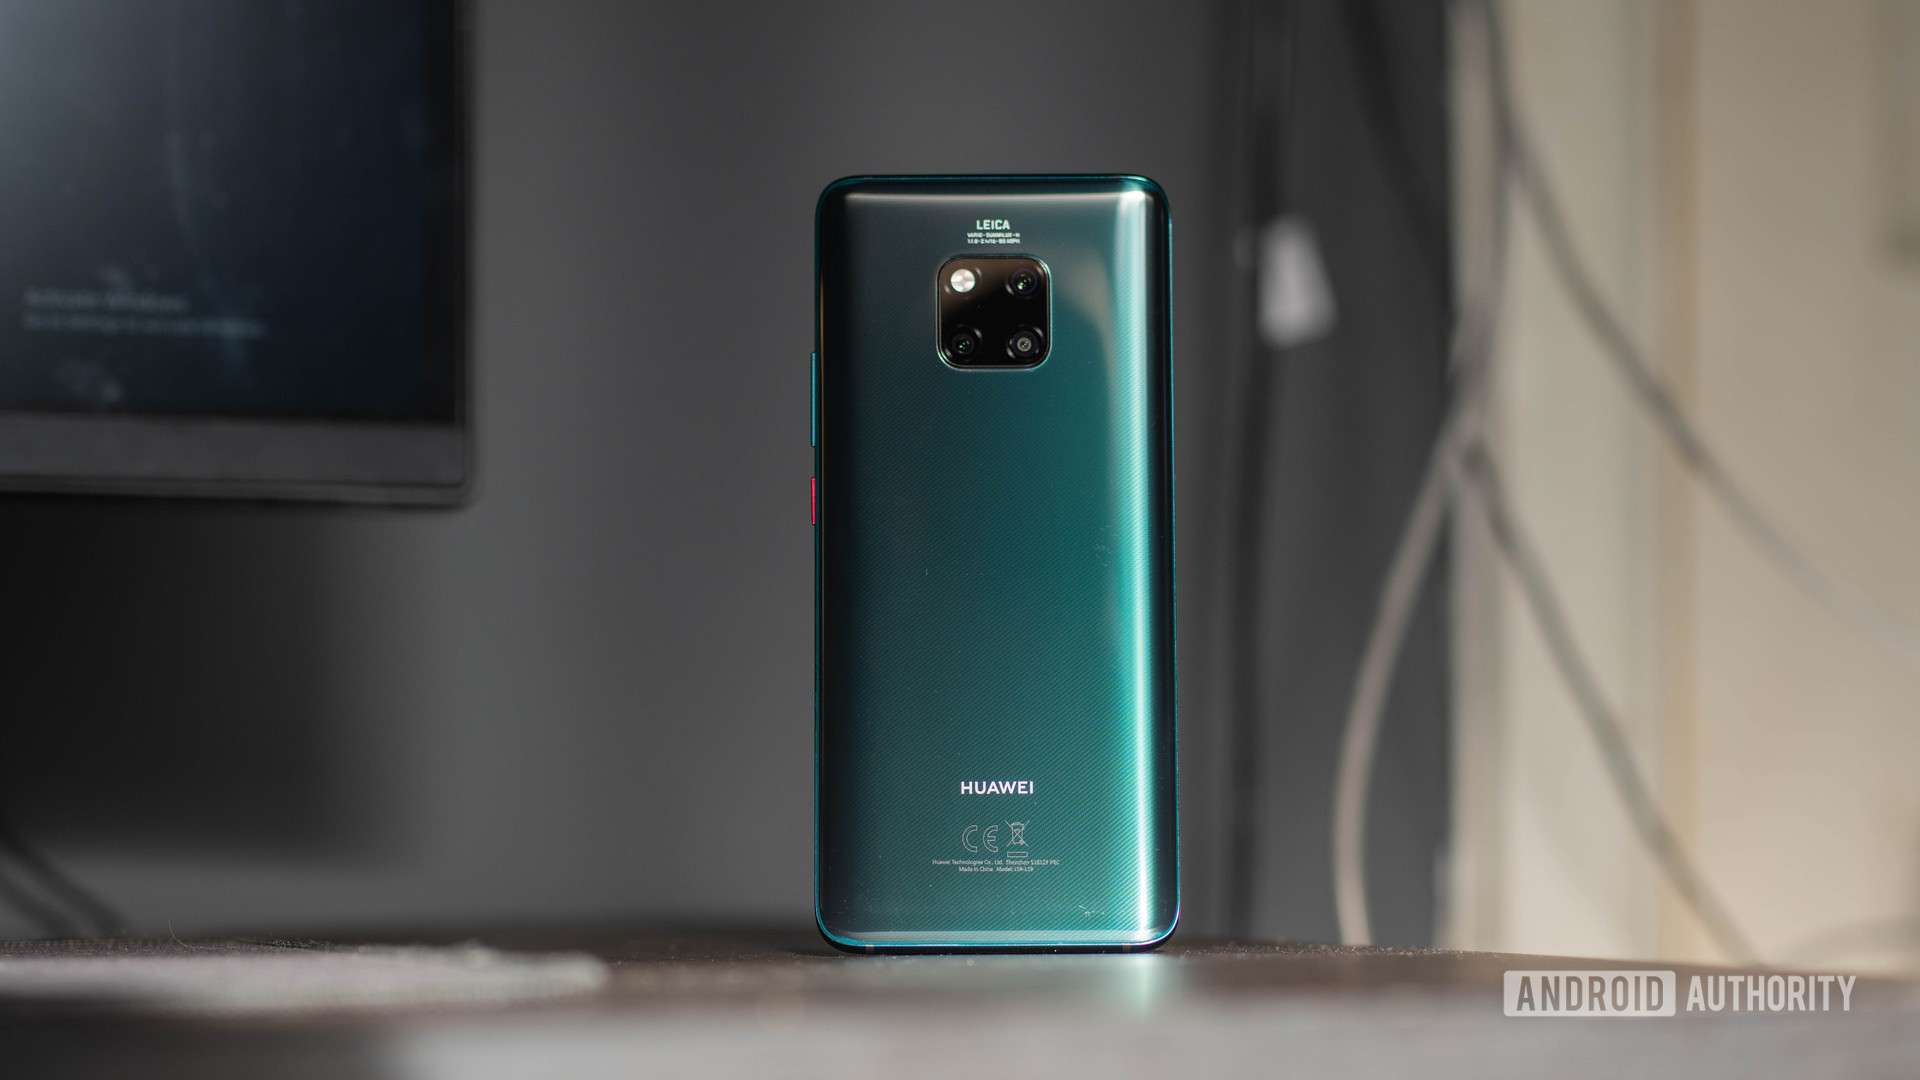 HUAWEI Mate 20 Pro back side directly on